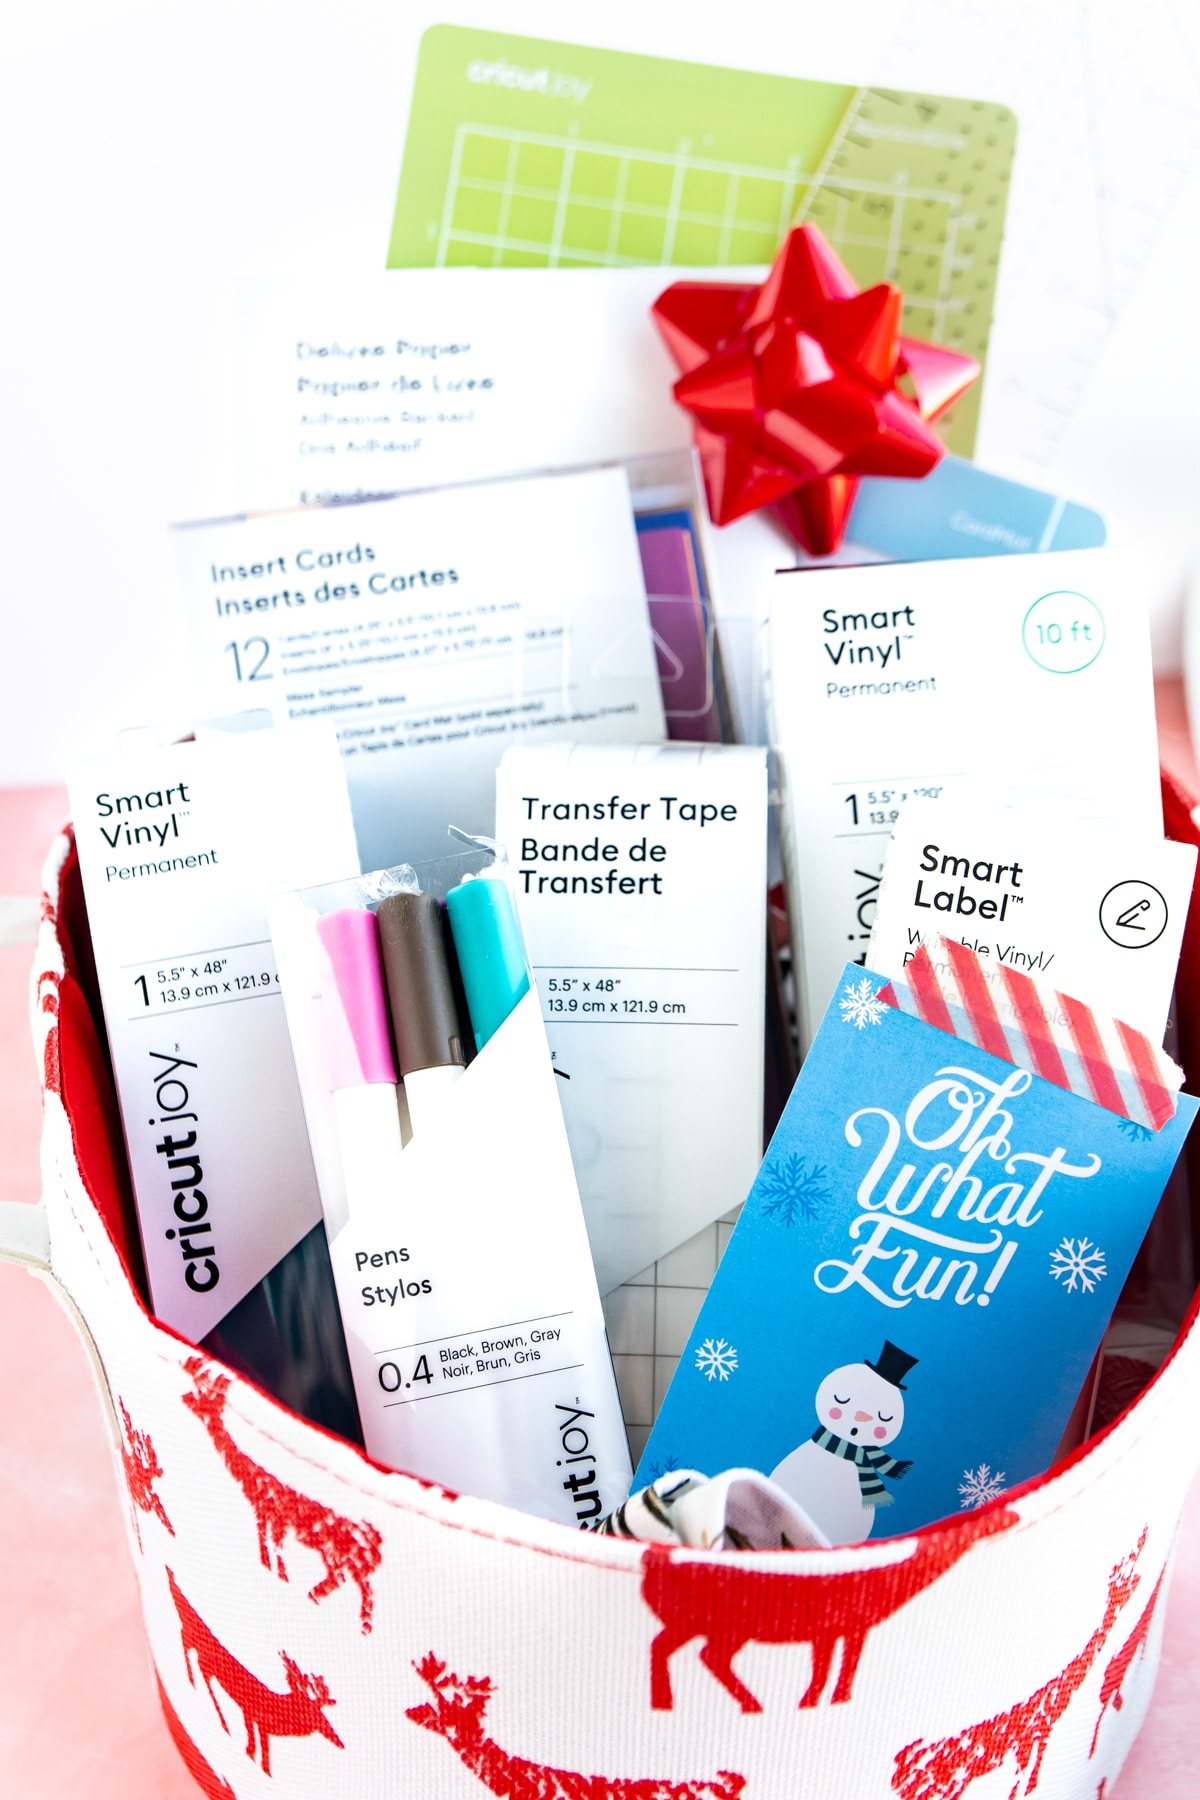 Cricut Joy Gift Basket for the Holidays - Clean and Scentsible